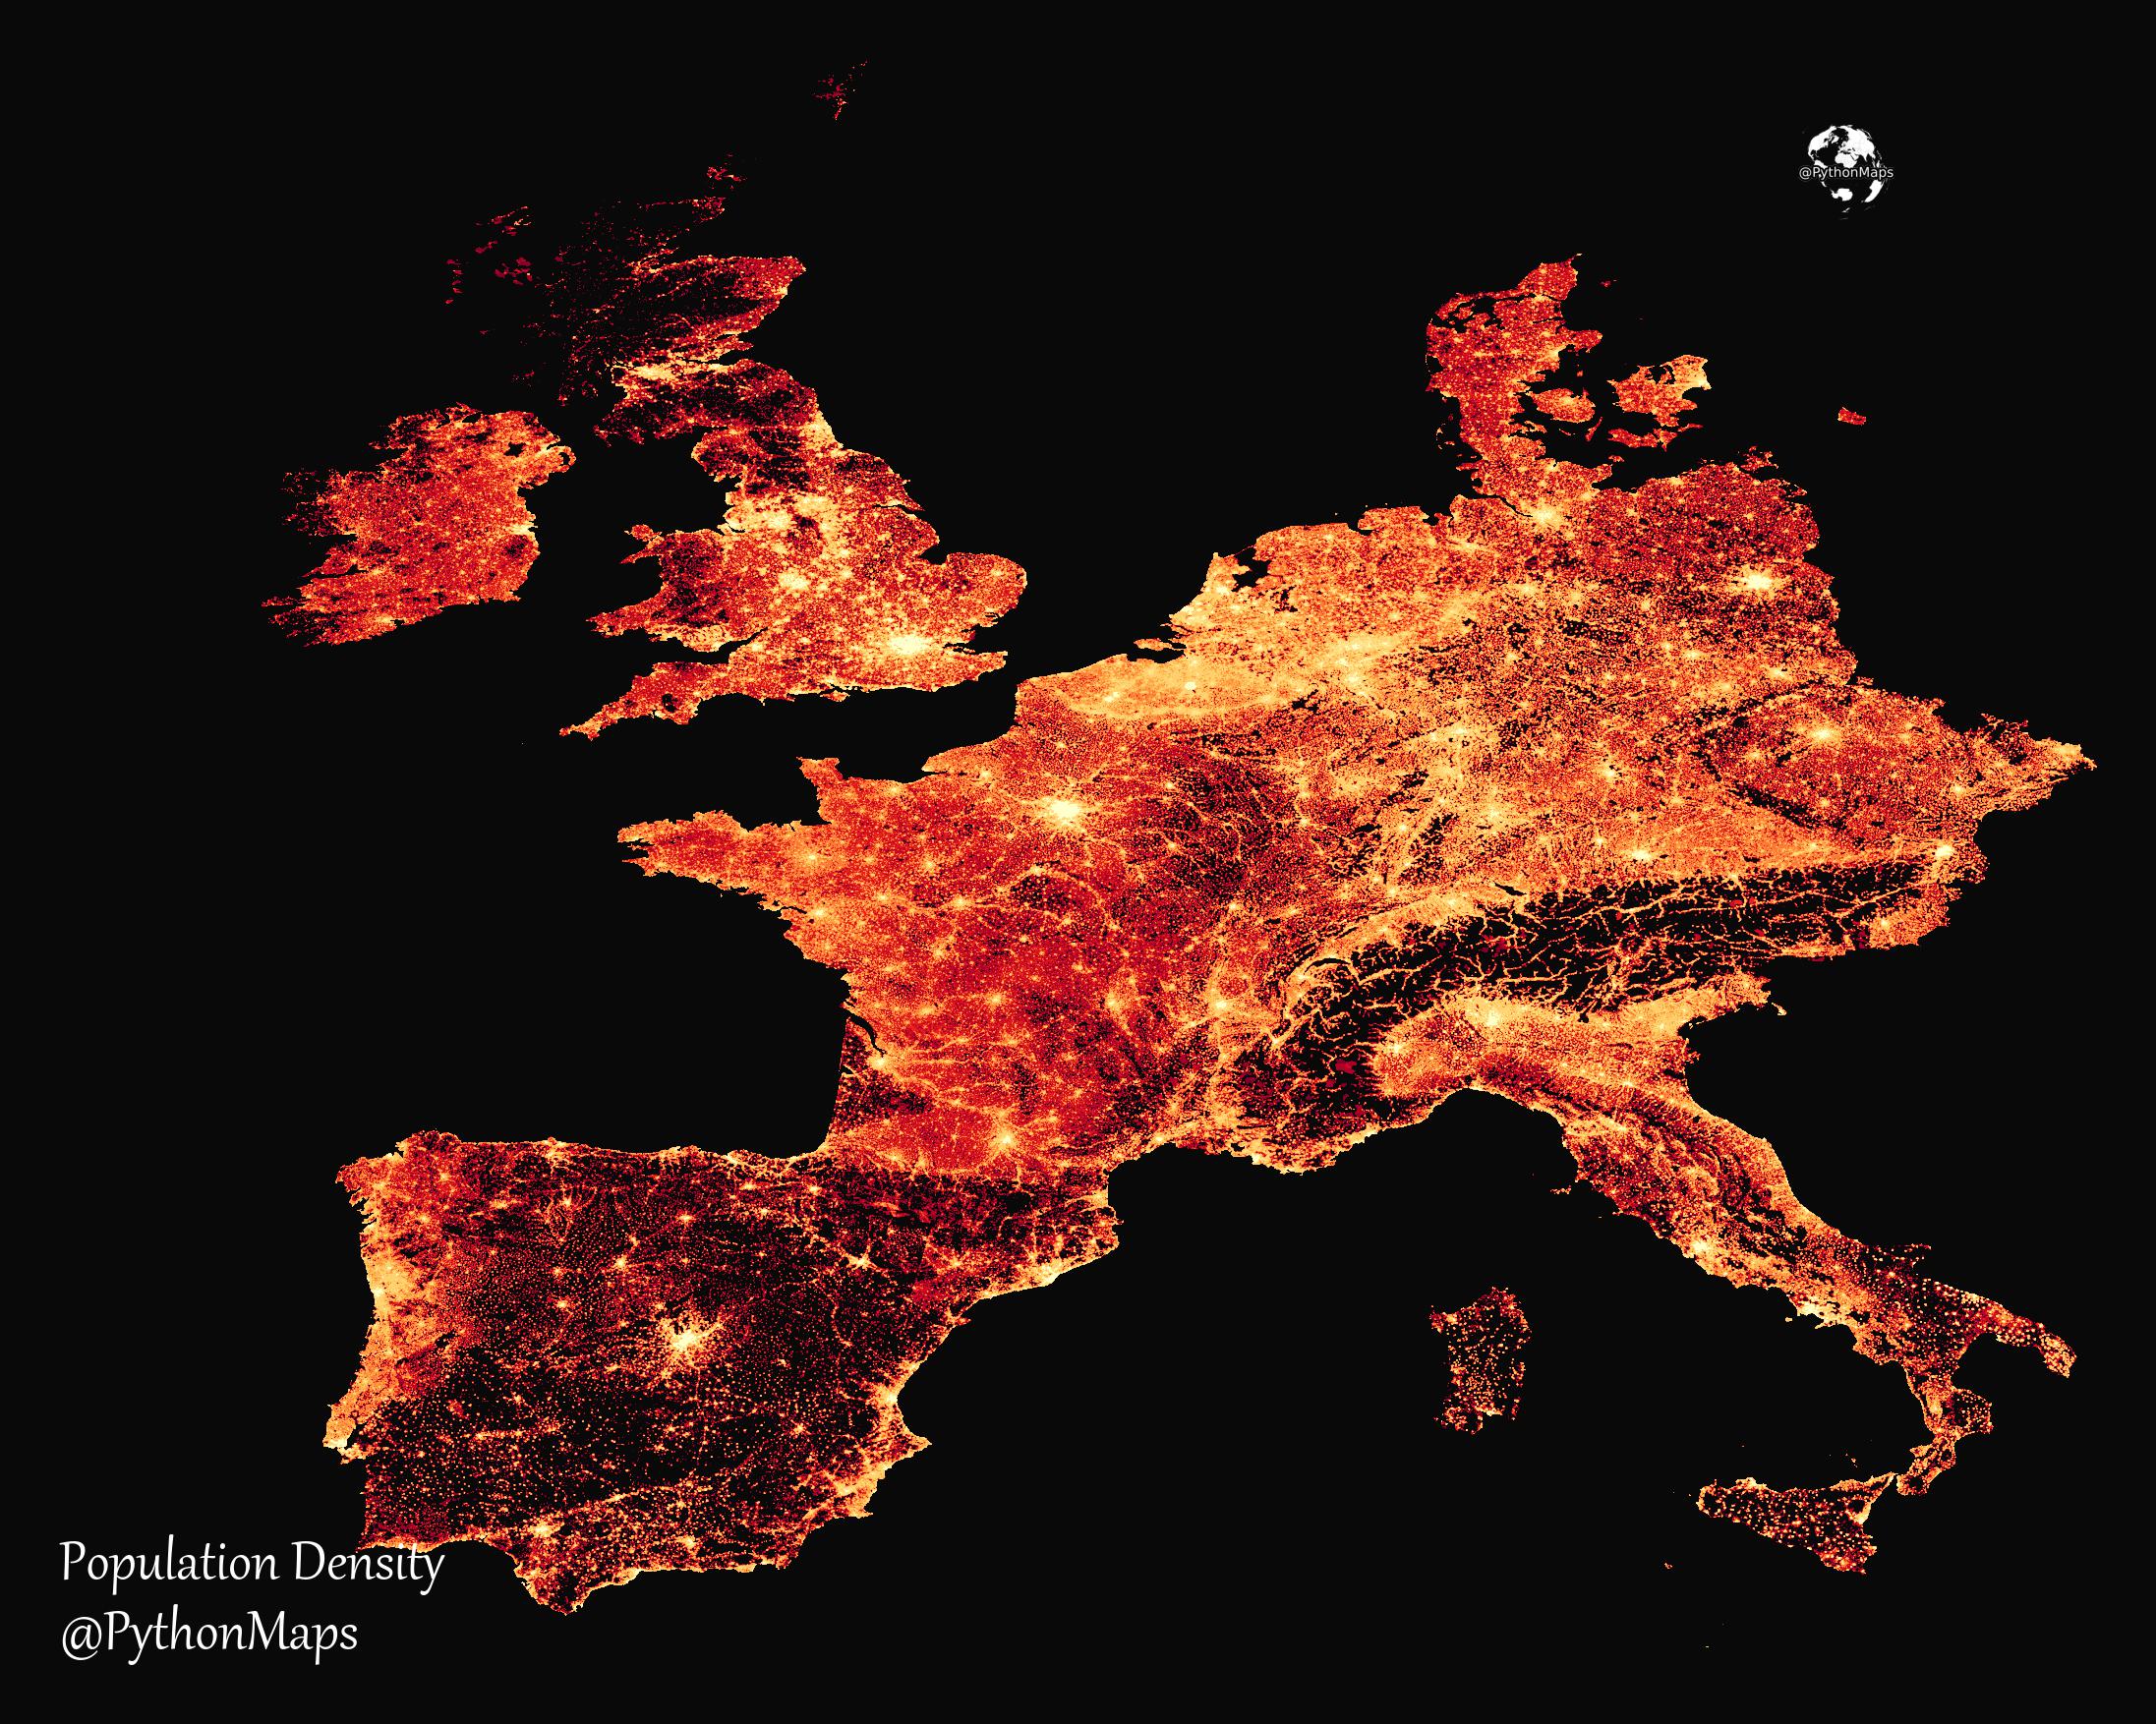 The Population density of Europe